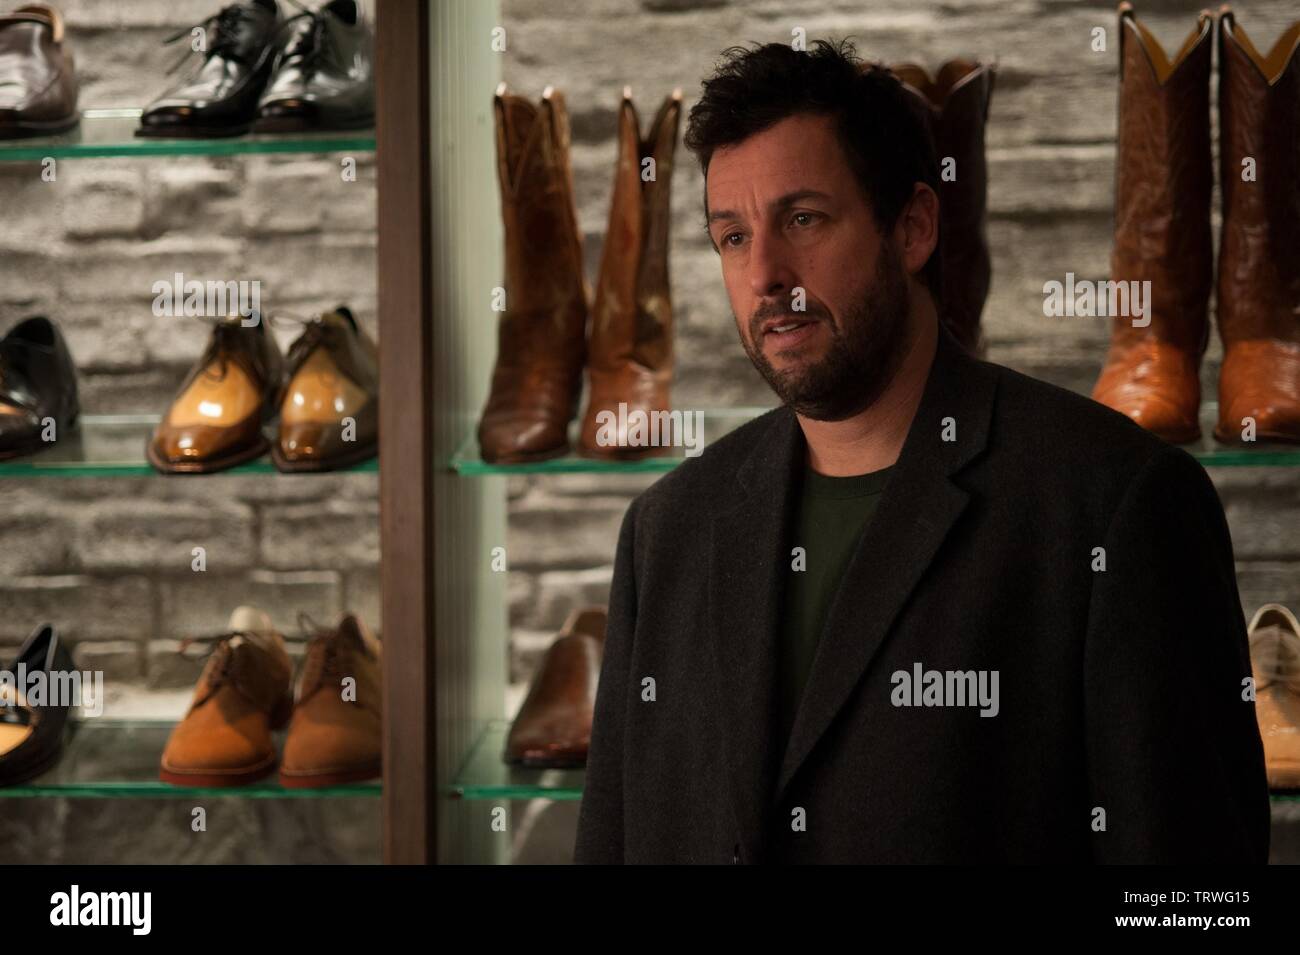 ADAM SANDLER in THE COBBLER (2014). Copyright: Editorial use only. No merchandising or book covers. This is a publicly distributed handout. Access rights only, no license of copyright provided. Only to be reproduced in conjunction with promotion of this film. Credit: VOLTAGE PICTURES/NEXT WEDNESDAY PRO/GOLDEN SPIKE/HAPPY MADIS / Album Stock Photo